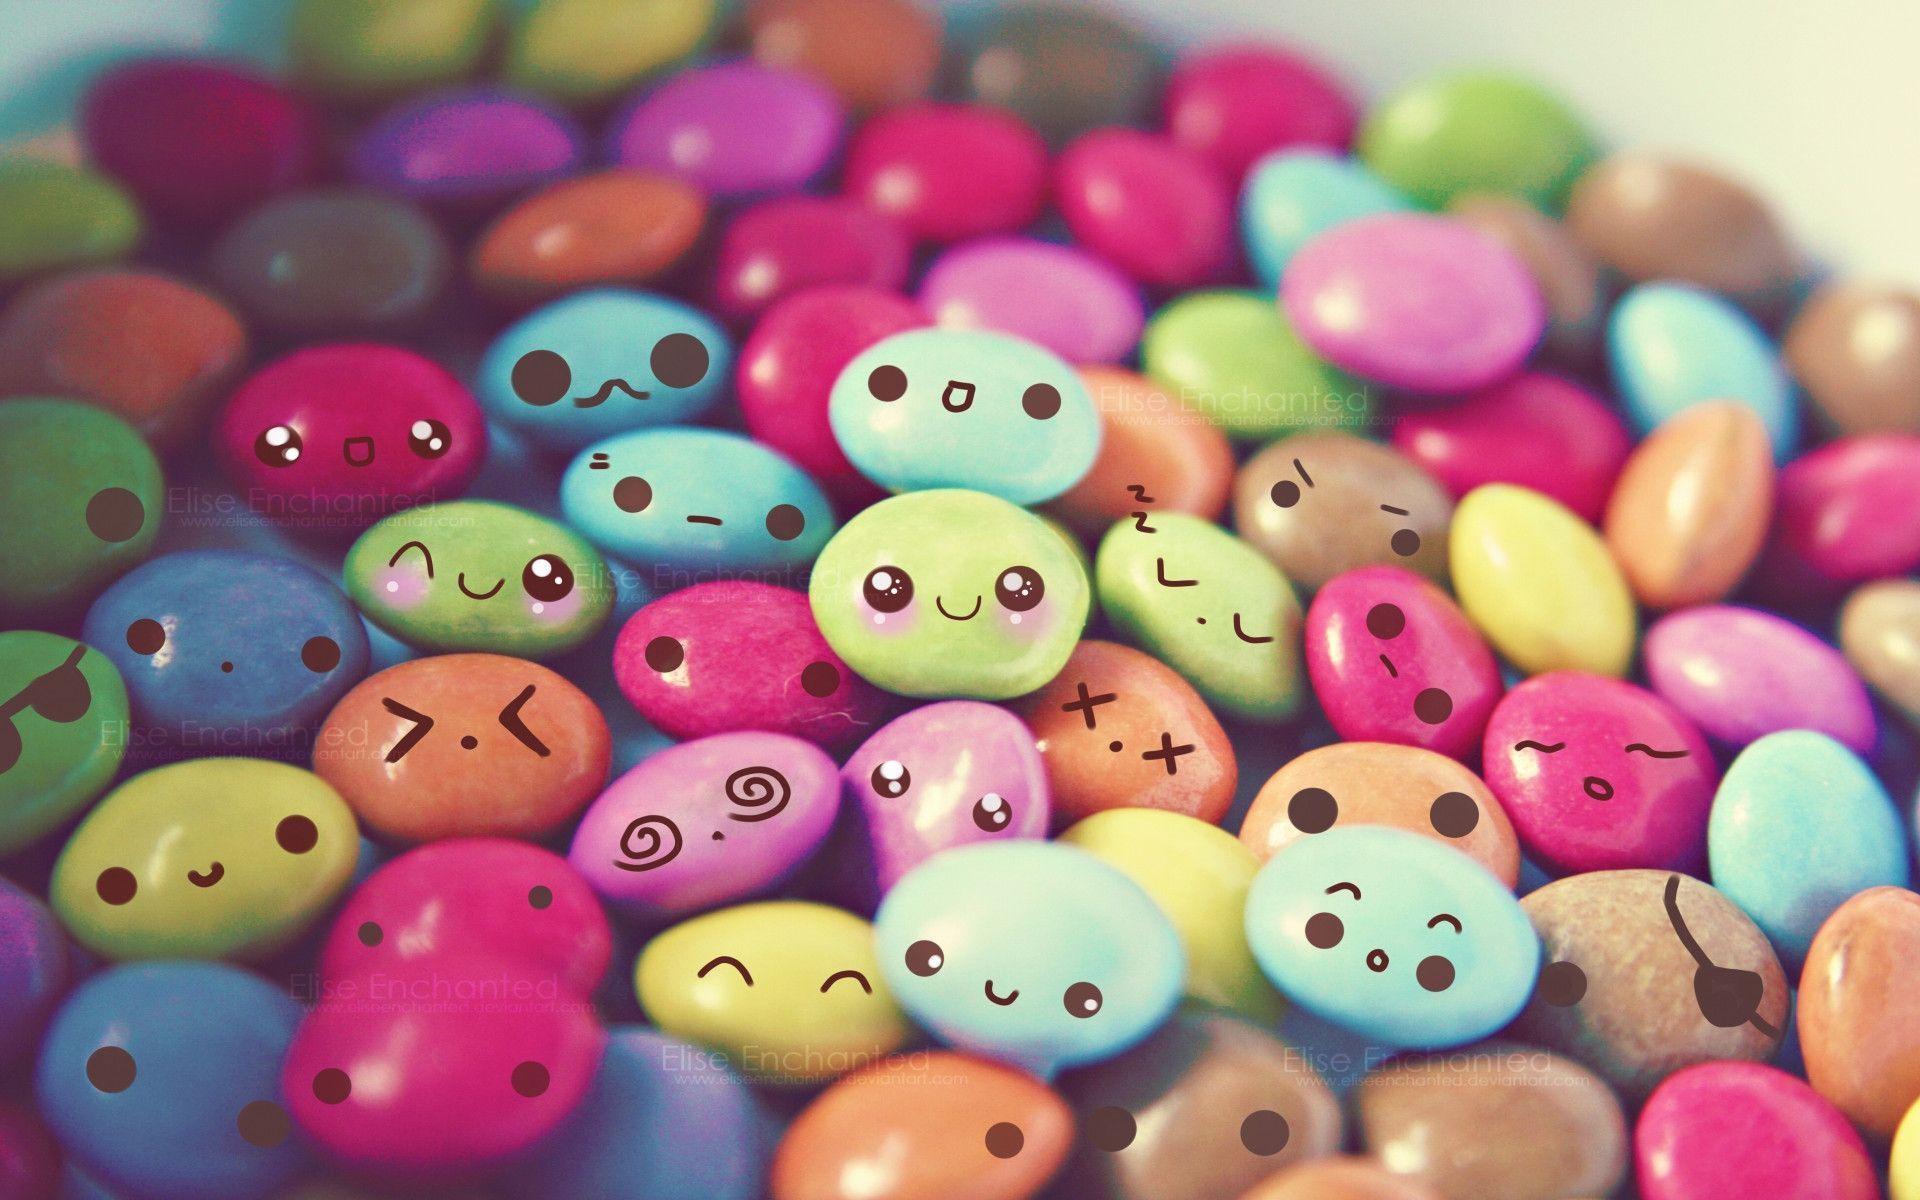 Download 1920x1200 Resolution of HD 30 cute which will make you